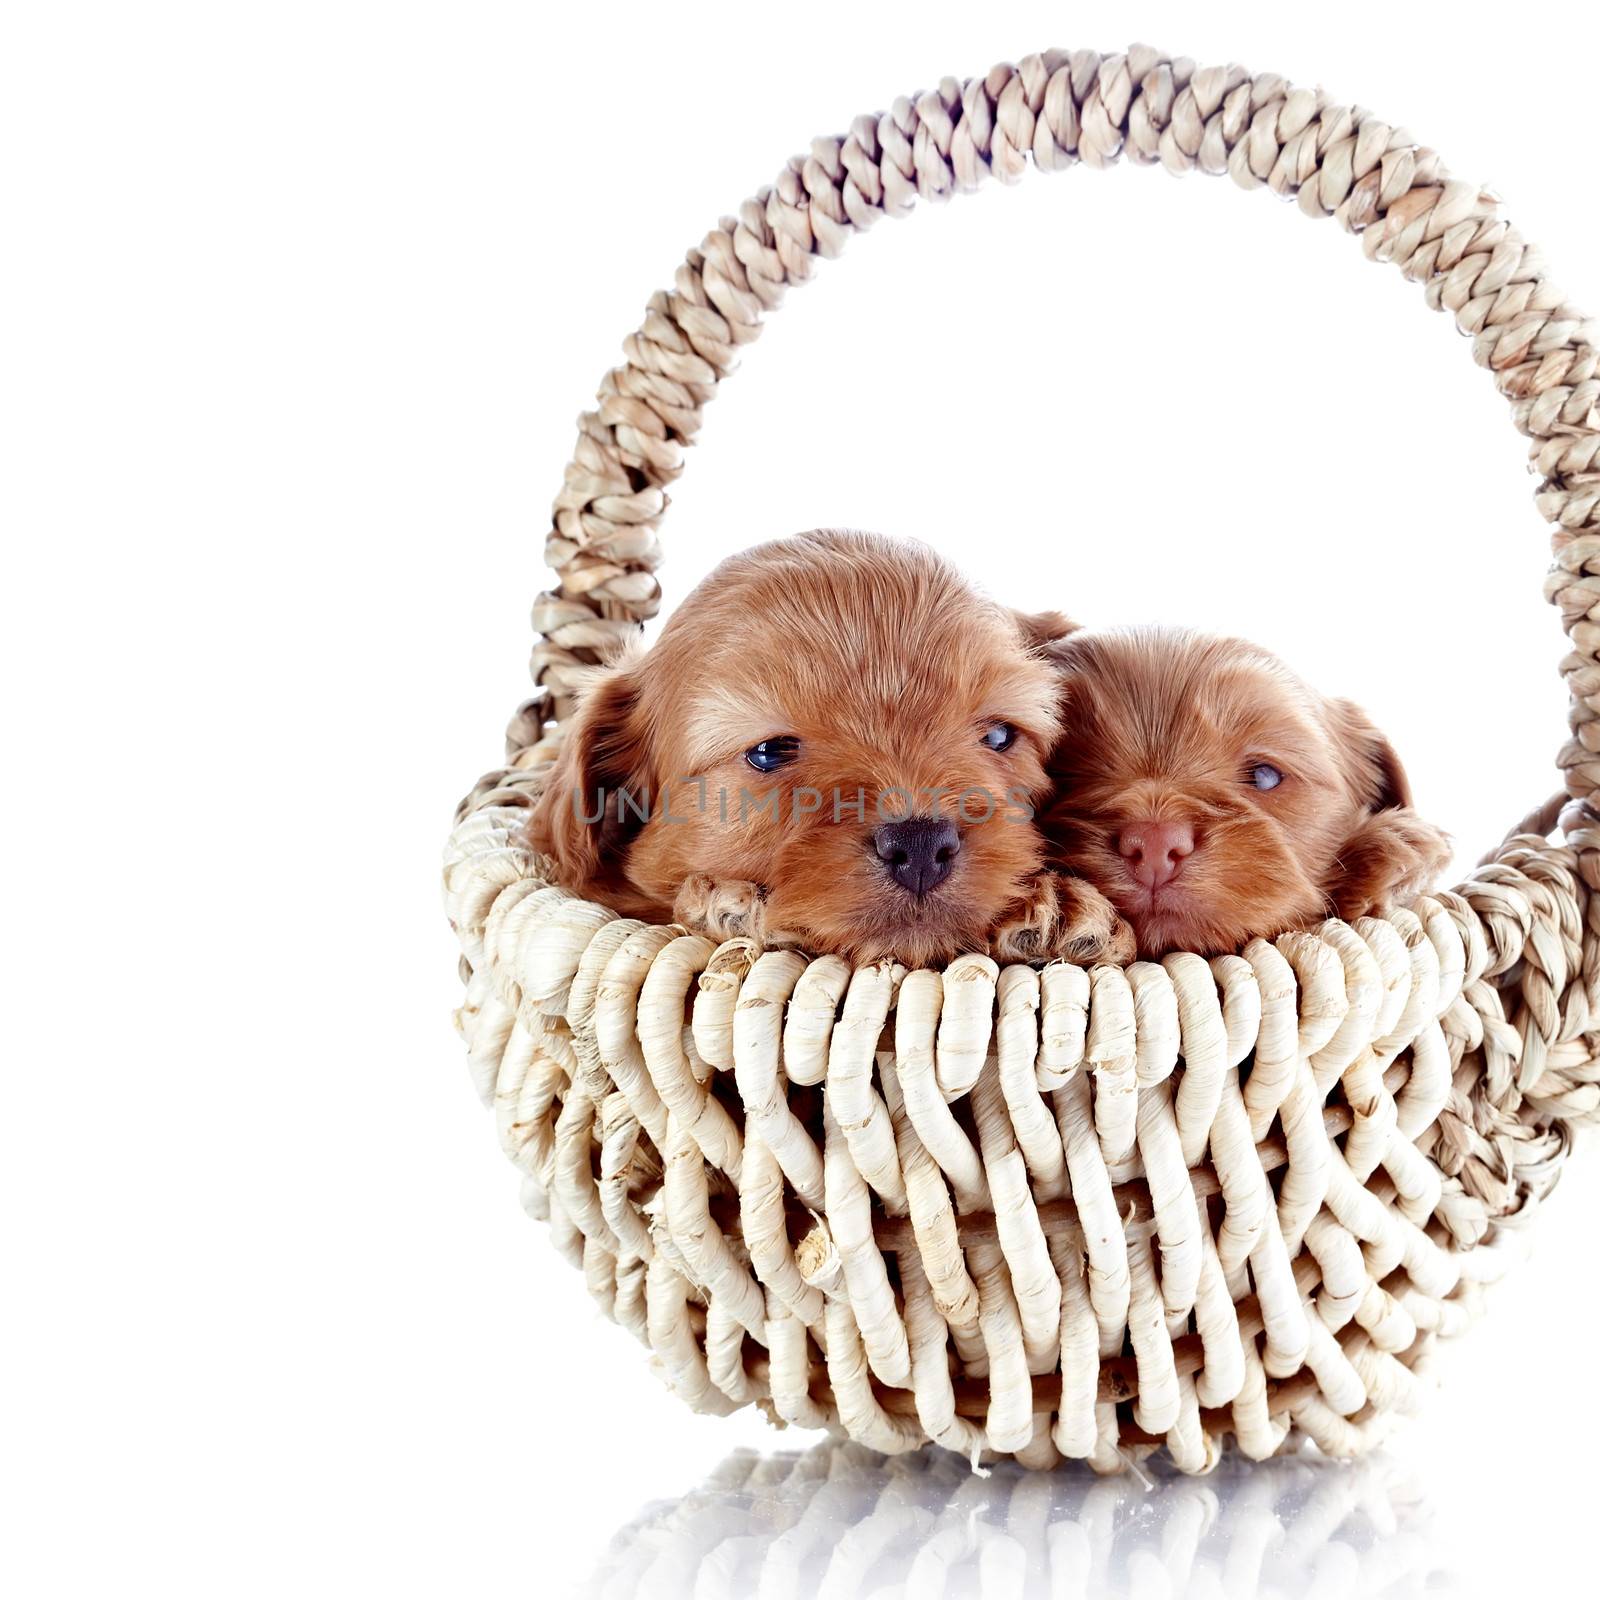 Two puppies in a wattled basket. Puppy of a decorative doggie. Decorative dog. Puppy of the Petersburg orchid on a white background